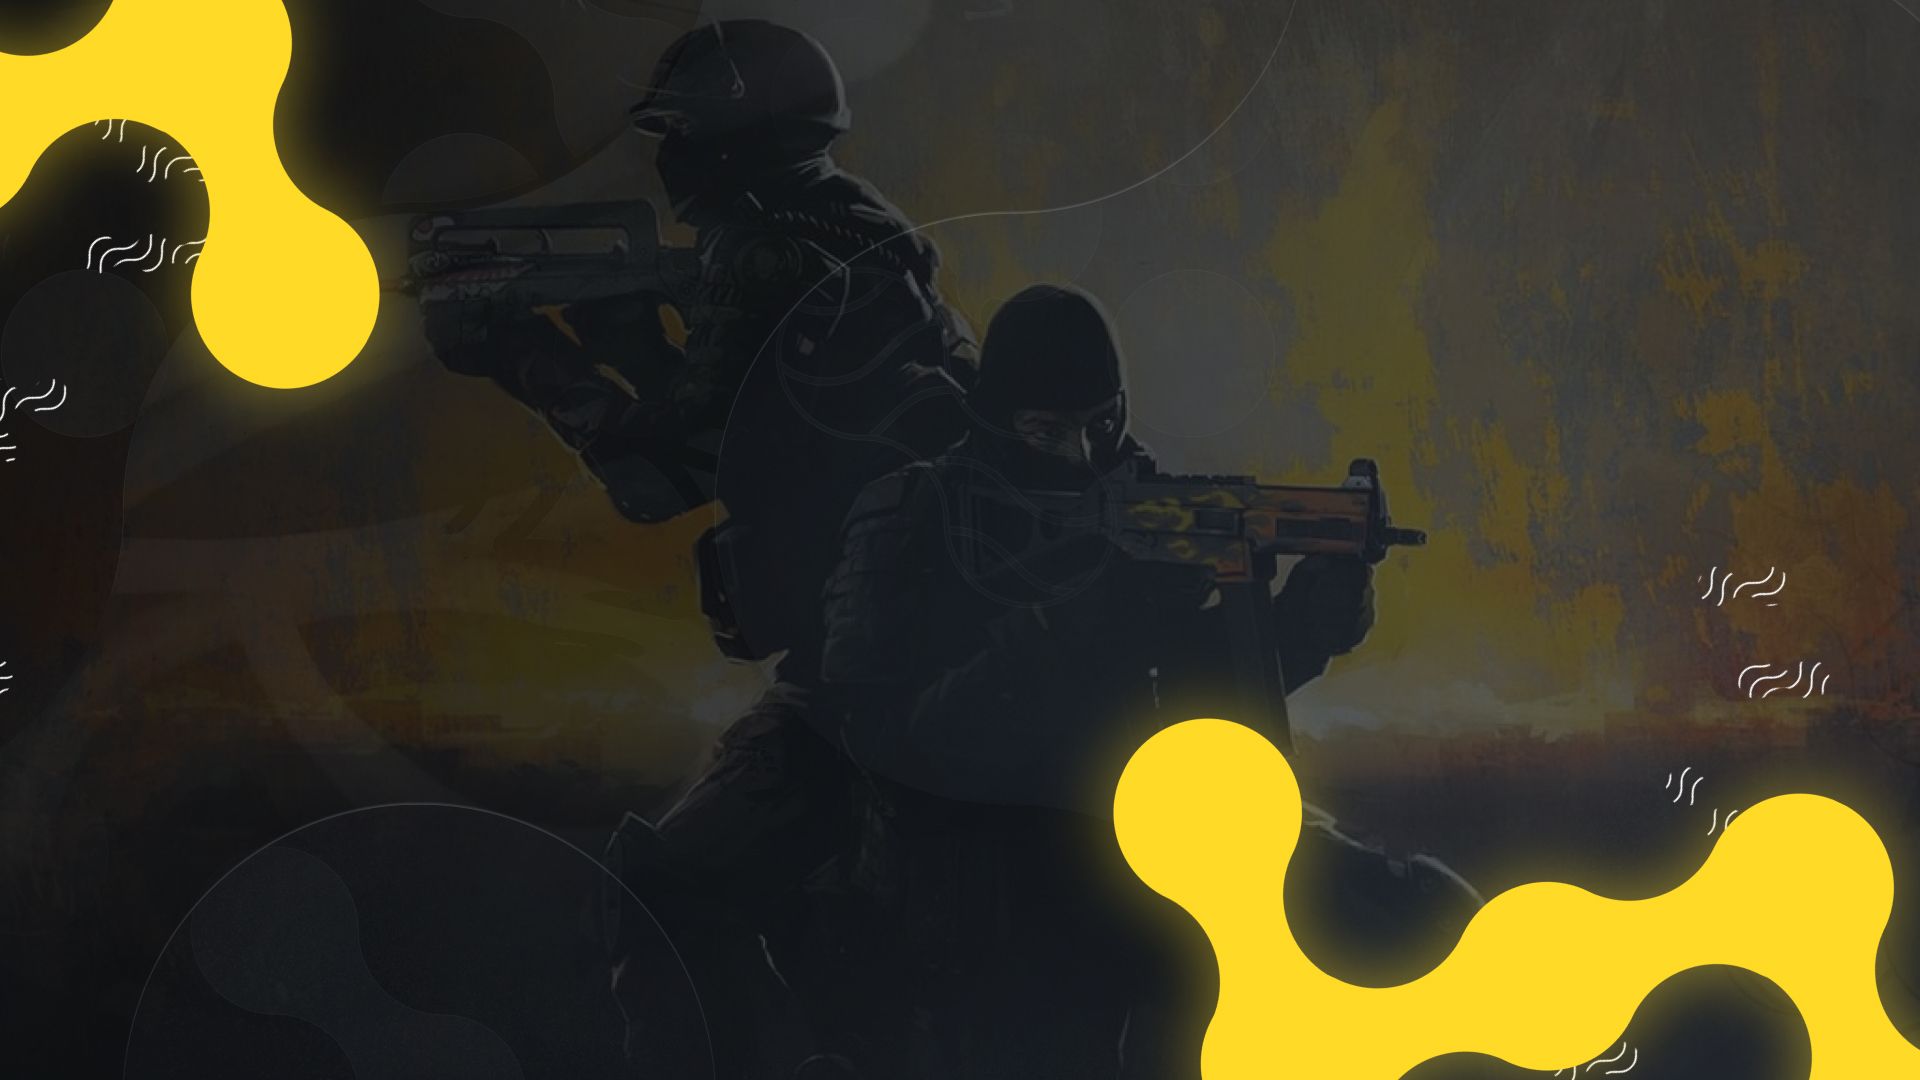 From Classic to Cutting-Edge: CSGO 2 is Here